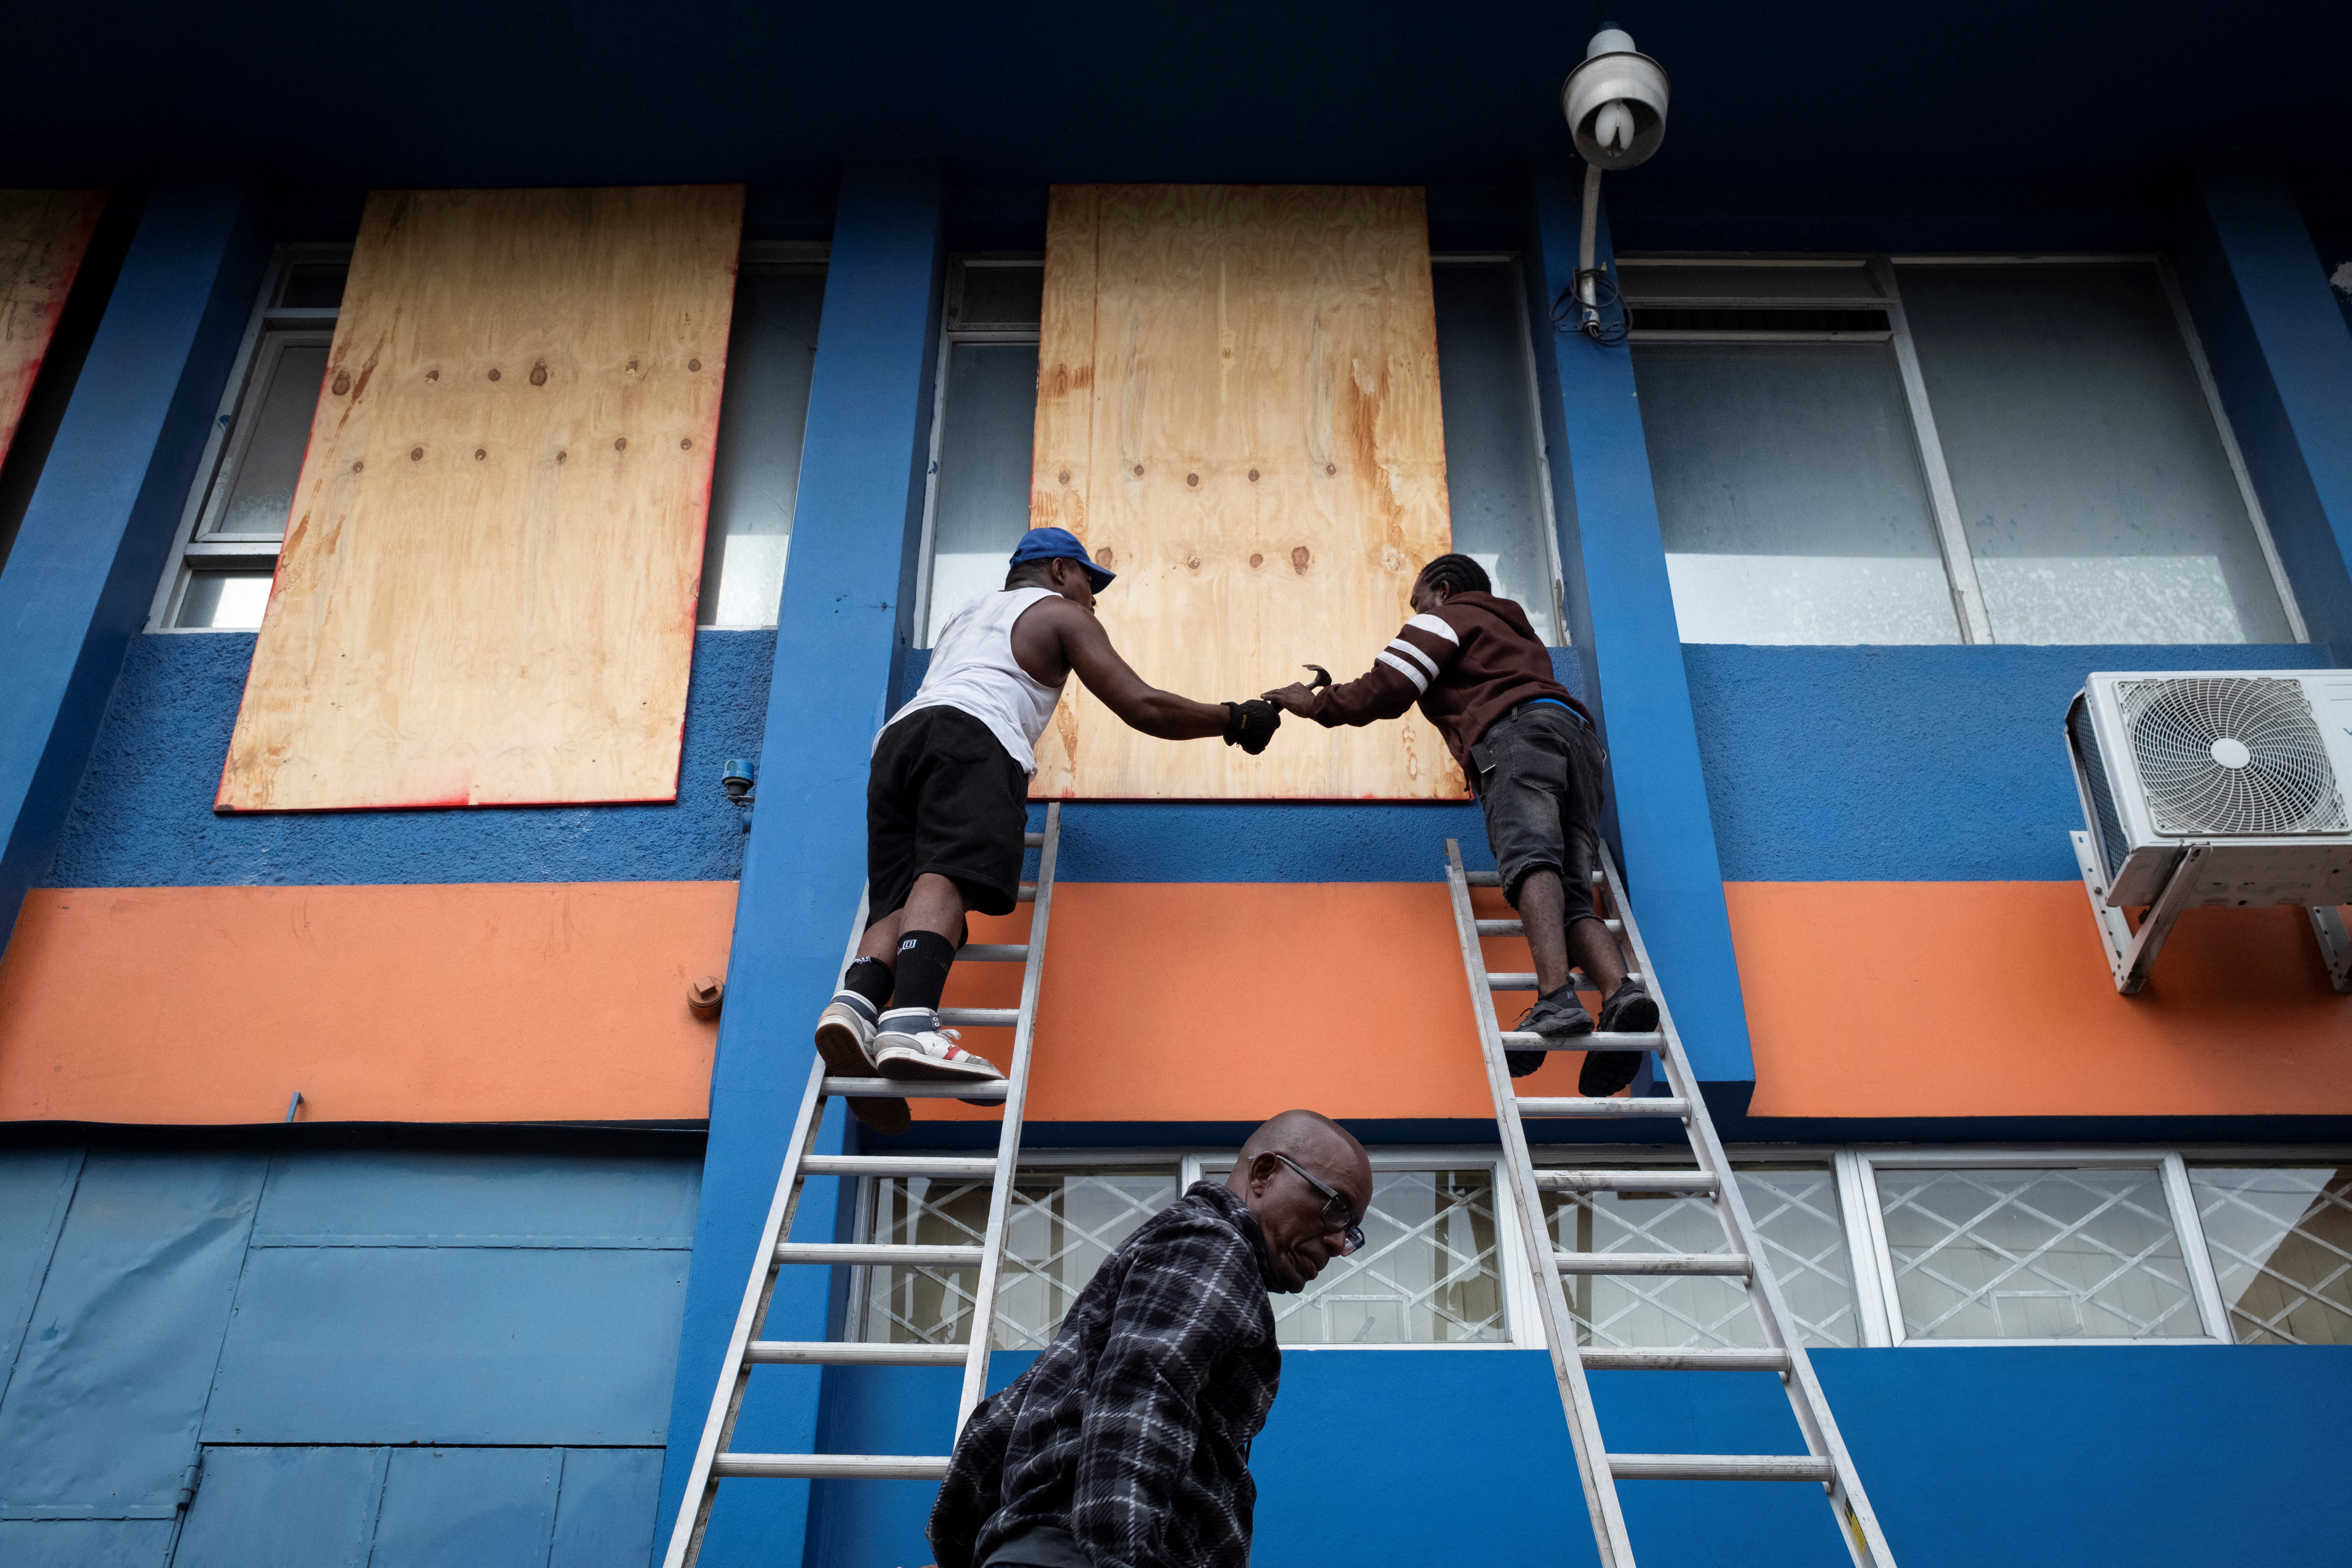 Two people board up windows of an office building in Kingston, Jamaica on Wednesday as Hurricane Beryl approaches.